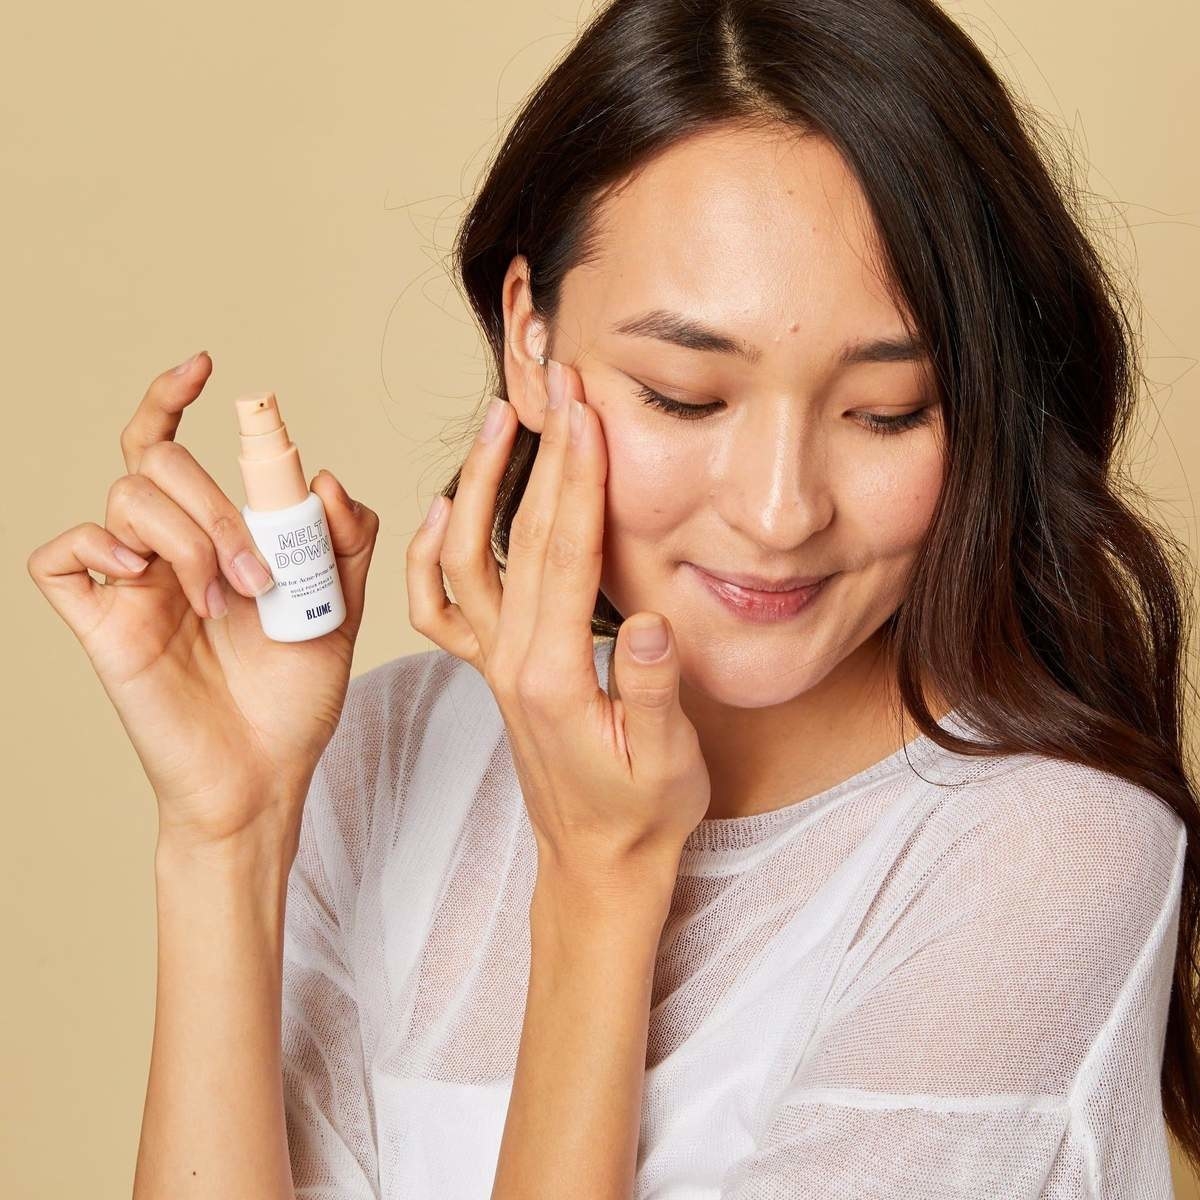 model holding the acne oil bottle and applying some of it to her face